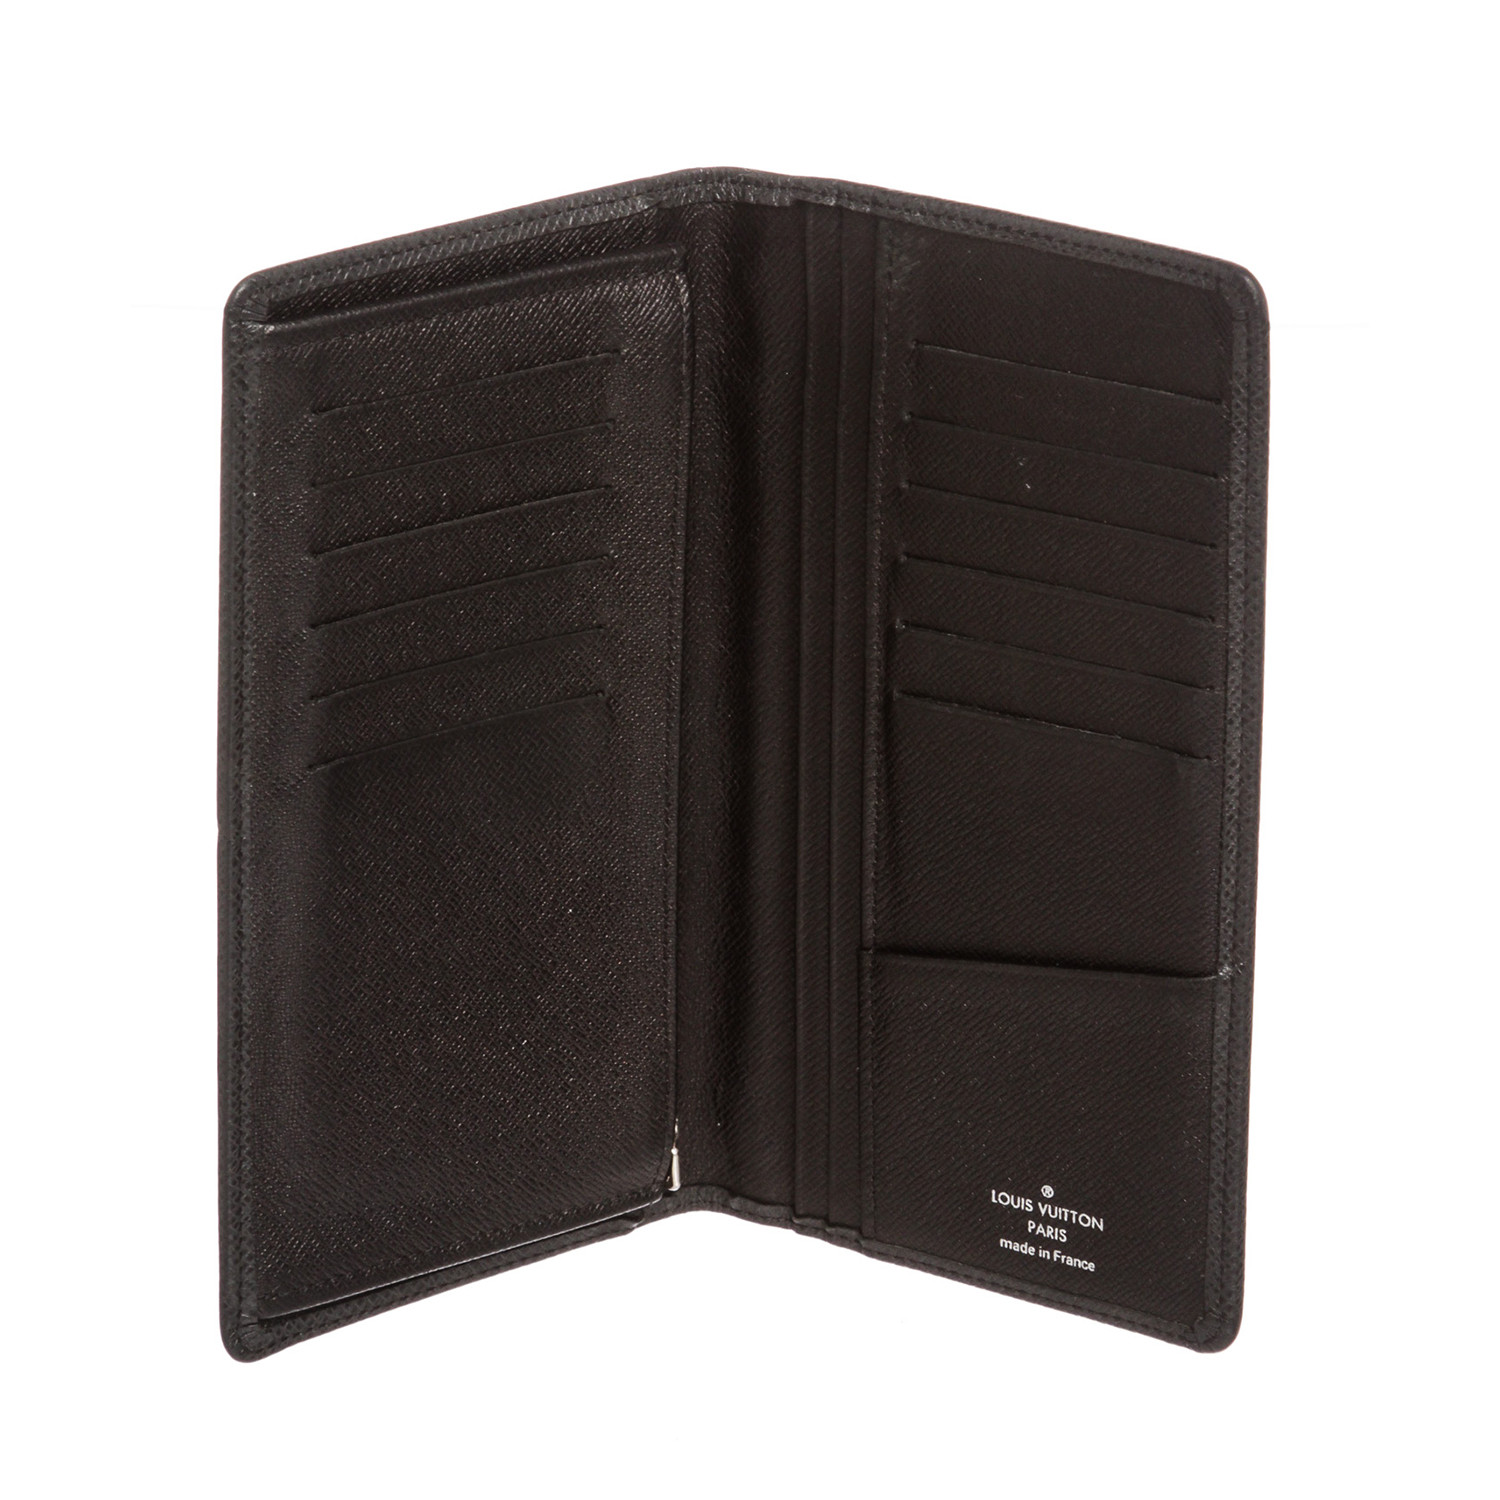 Louis Vuitton // Black Taiga Leather Brazza Wallet // Black // Pre-Owned - Pre-Owned Designer ...